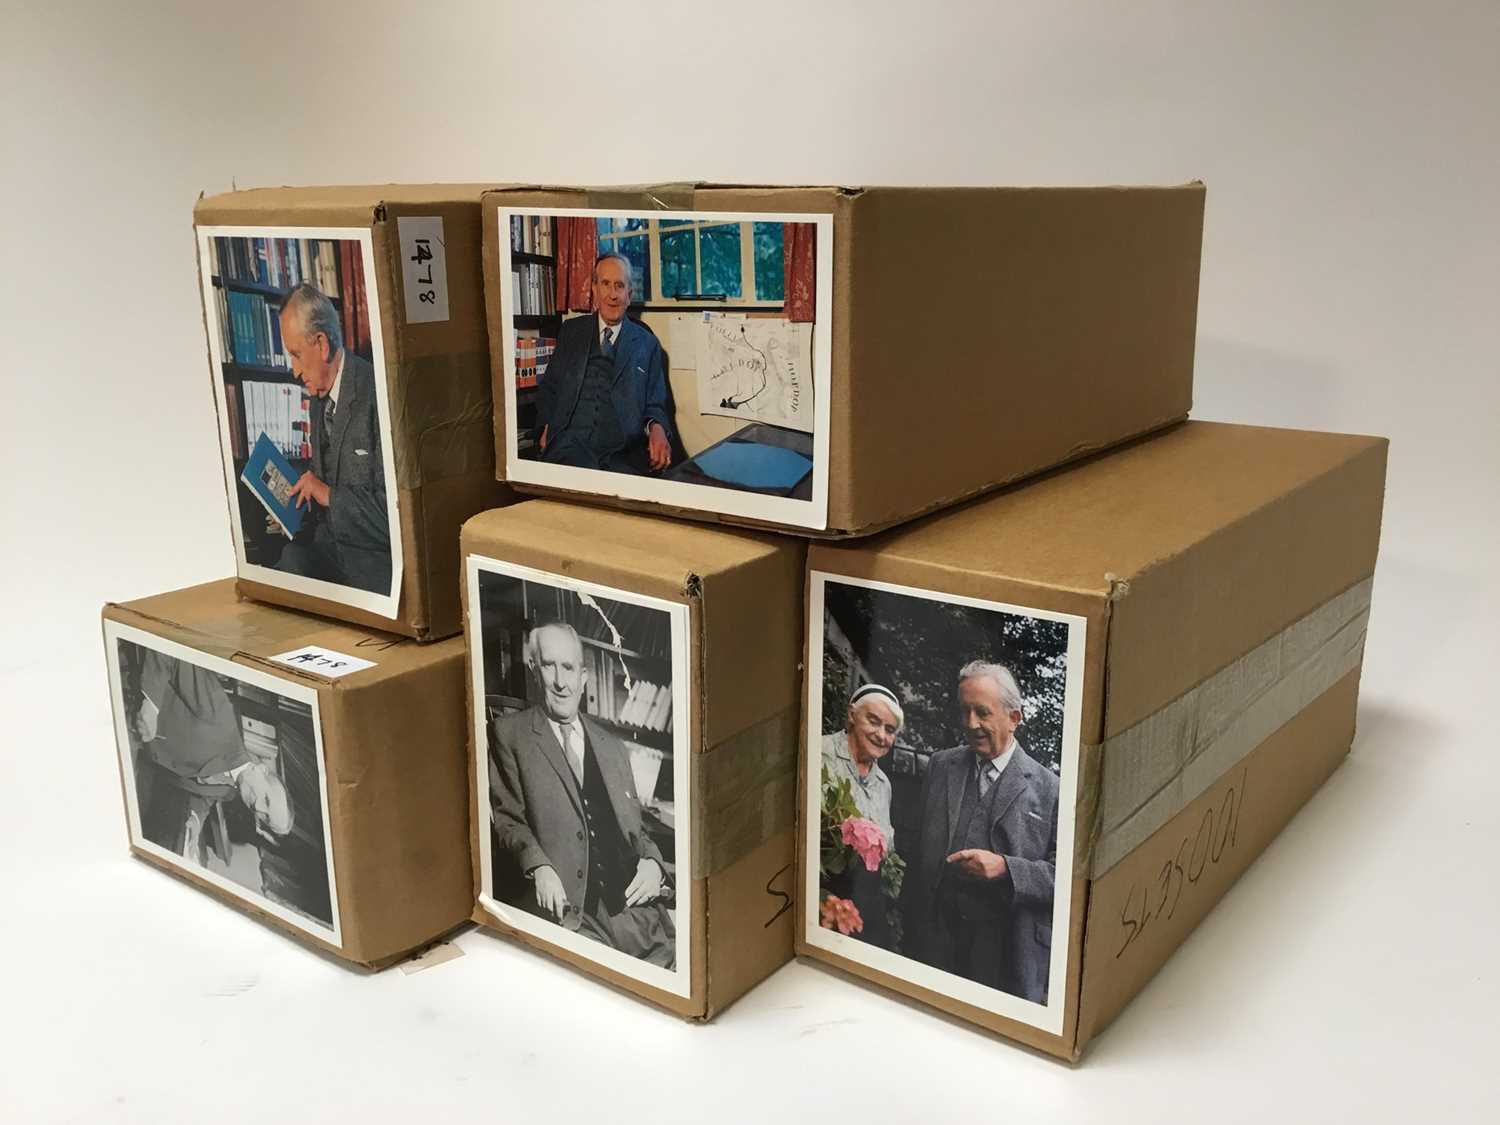 Lot 1478 - Tolkien interest: Very large quantity of postcard sets taken from the 1961 and 1966 Pamela Chandler photographic sessions with  J. R. R. Tolkien